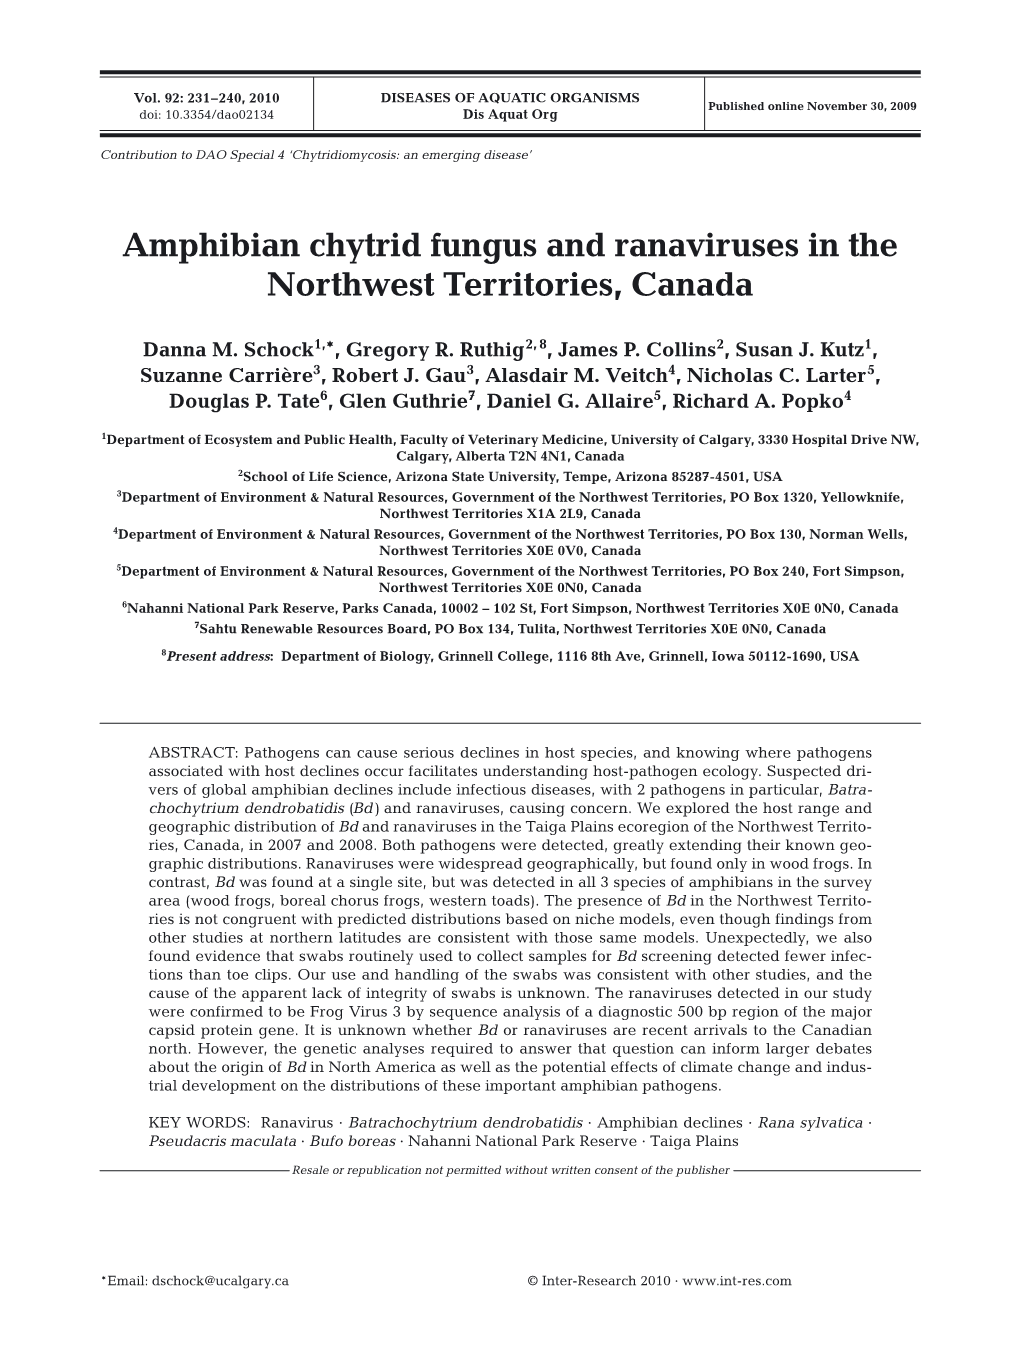 Amphibian Chytrid Fungus and Ranaviruses in the Northwest Territories, Canada